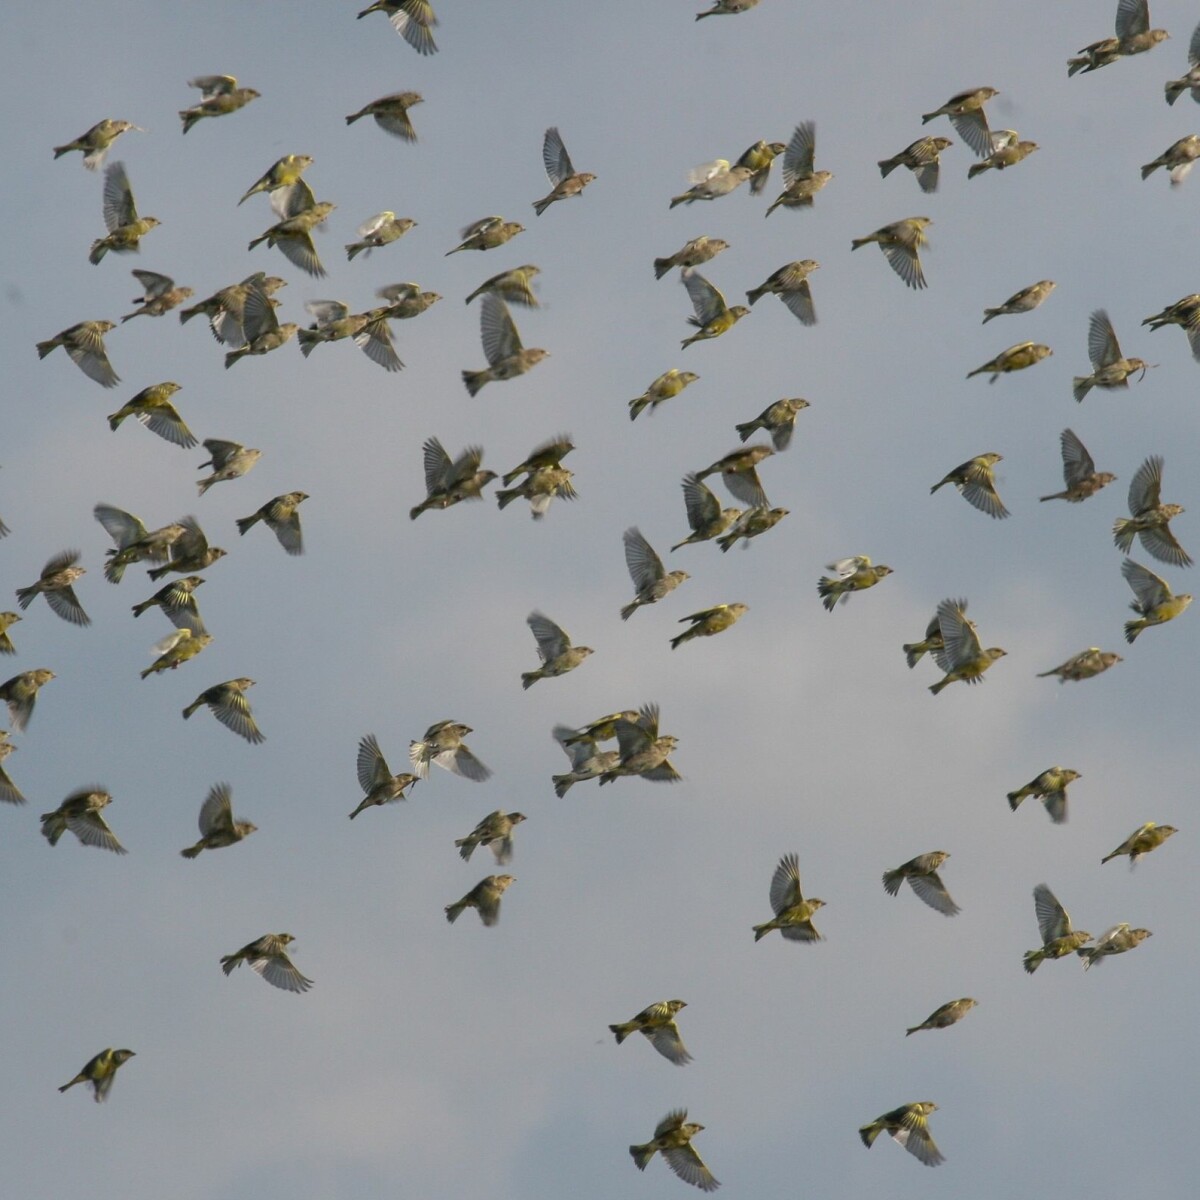 The great escape: Birds fly away from disease